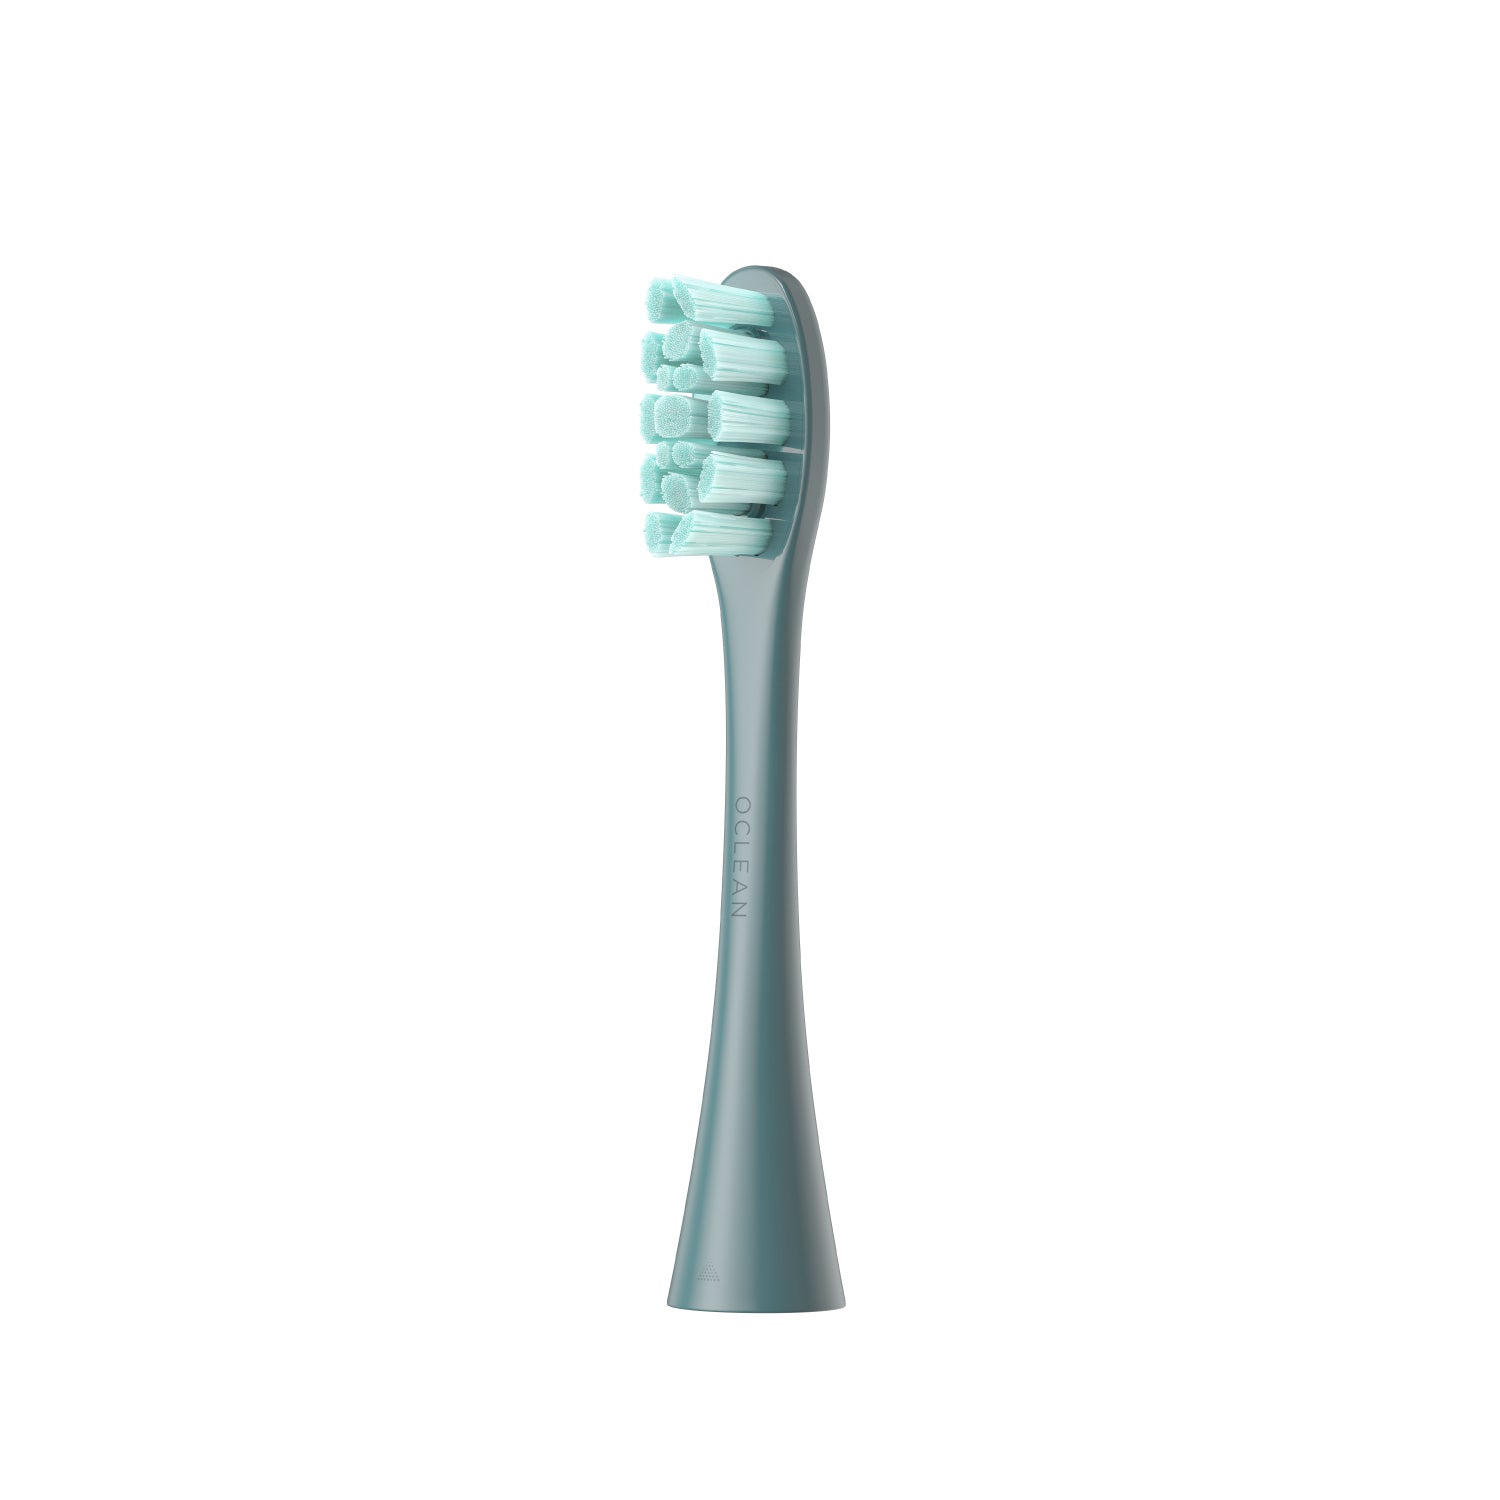 Oclean Brush Heads Refills Toothbrush Replacement Heads   Oclean Official